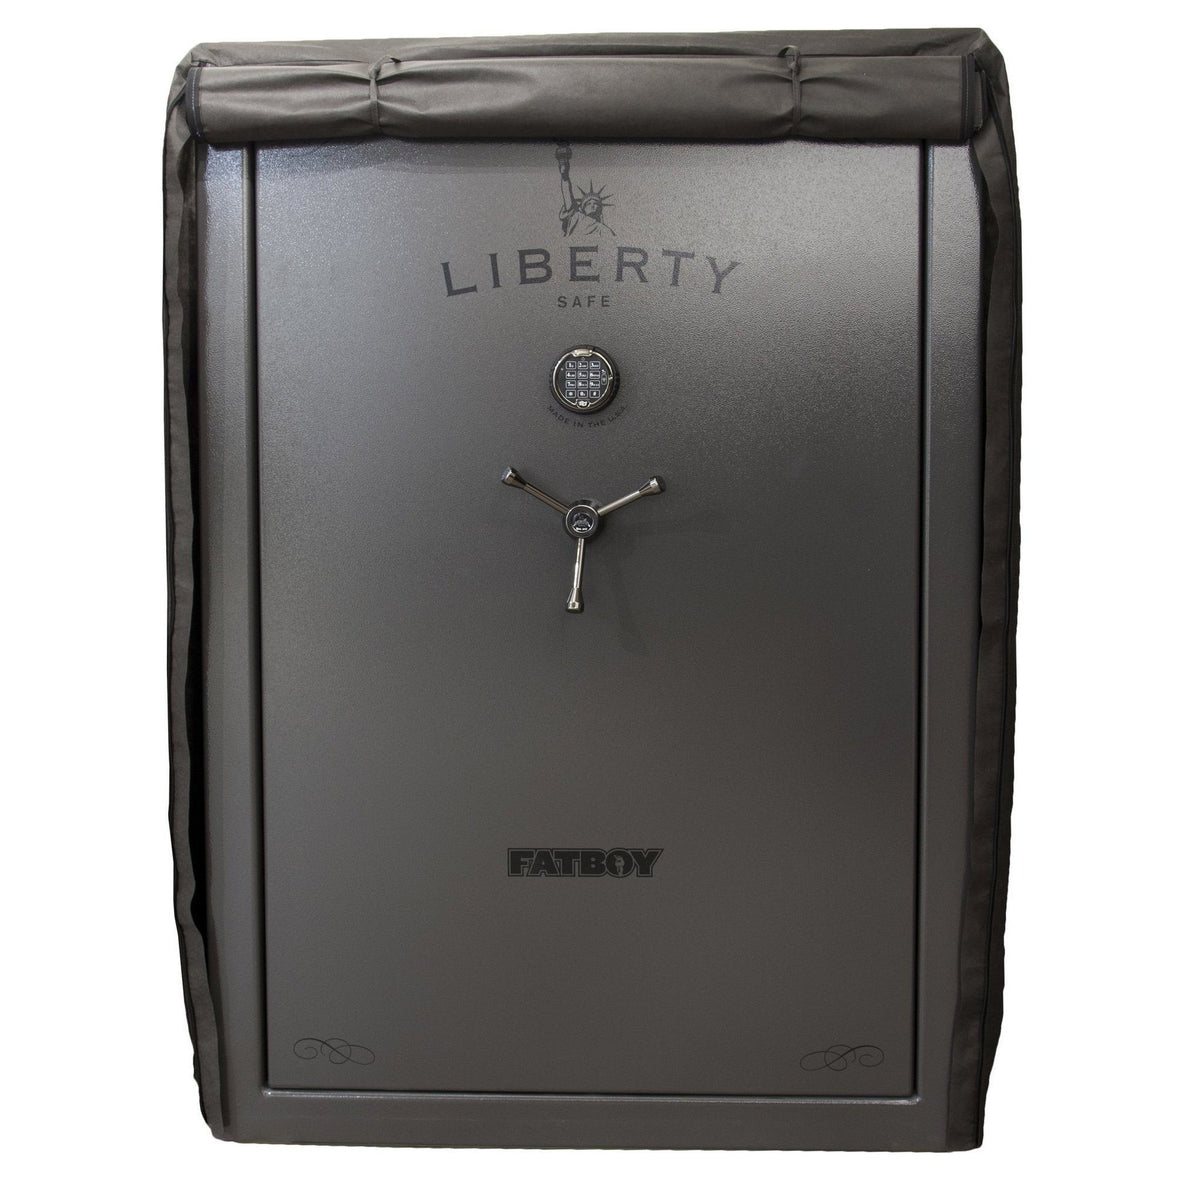 Liberty Safe Cover: 64 Size.